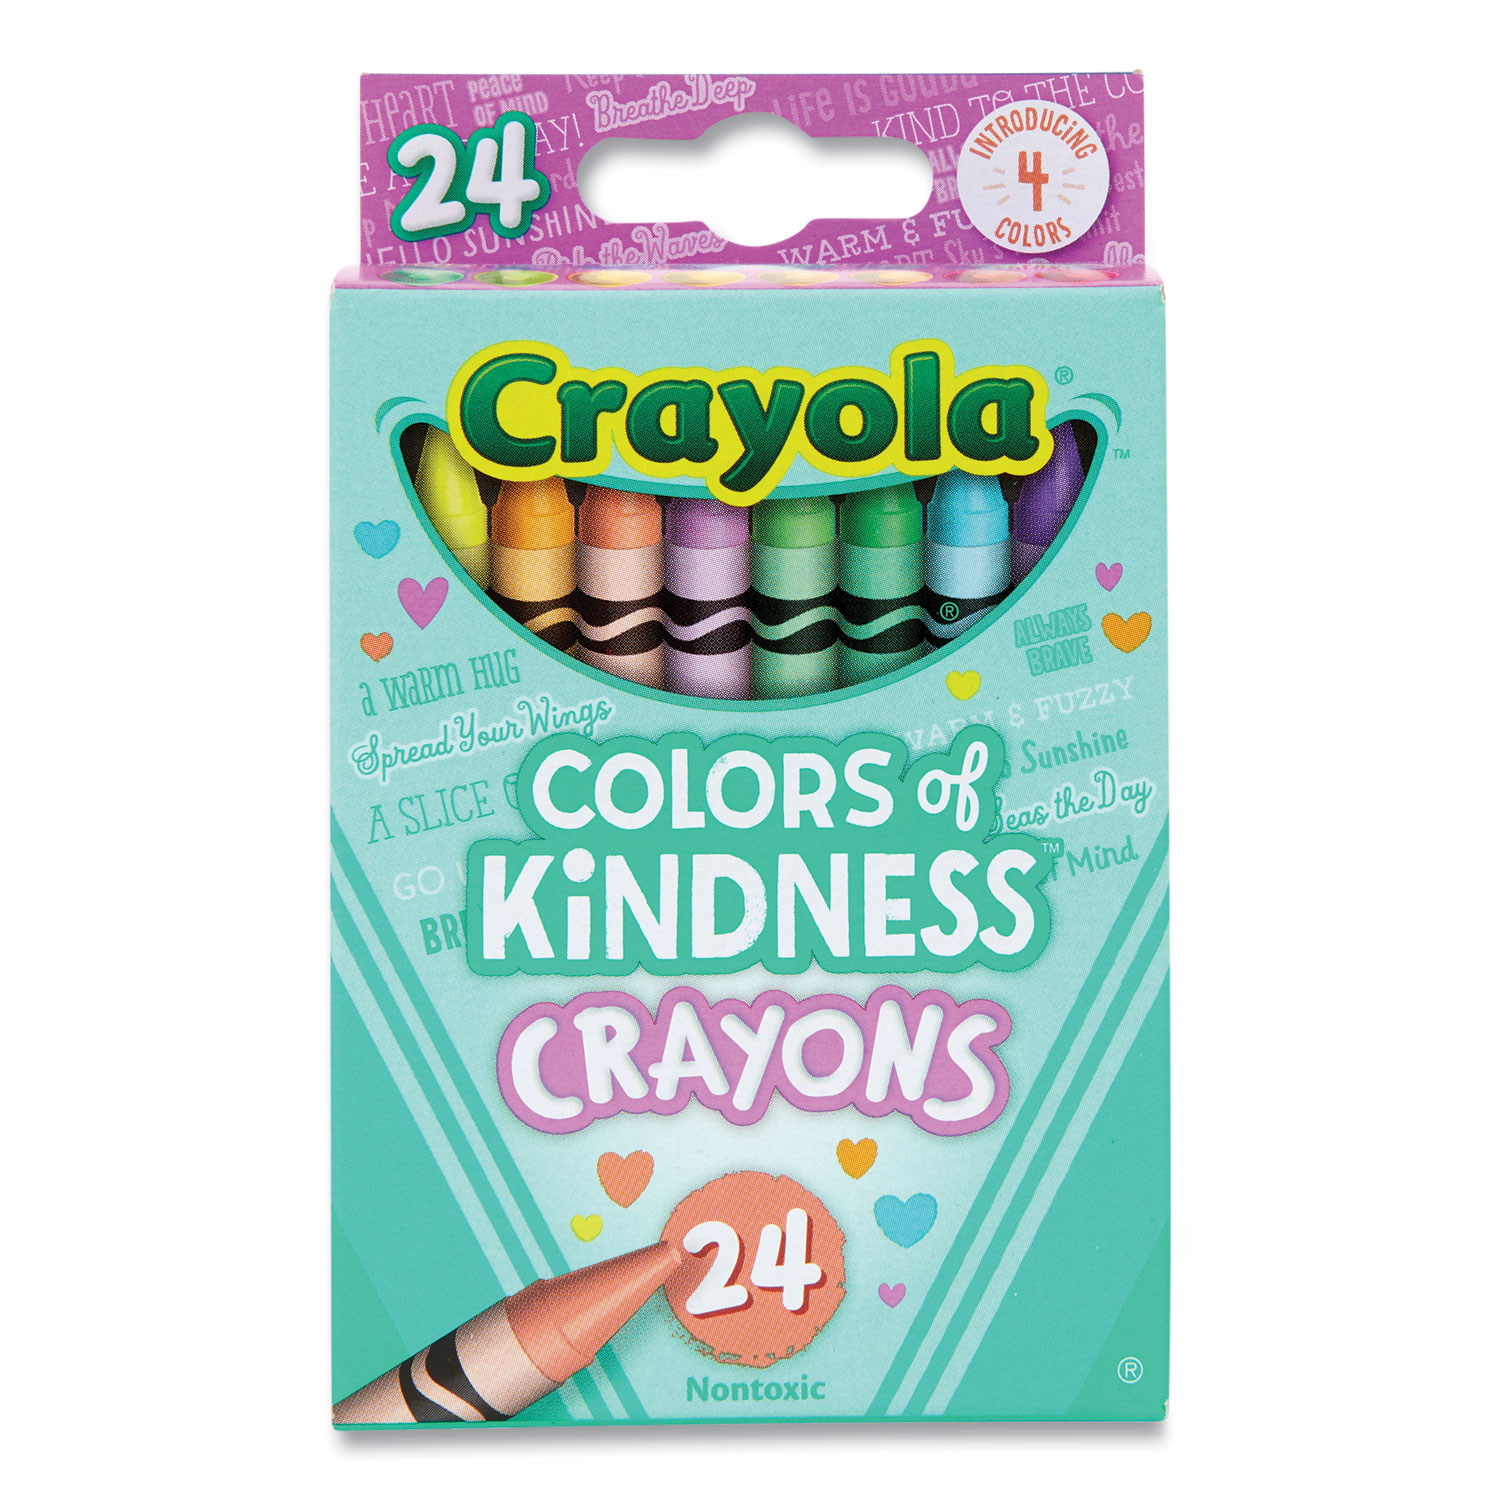 Classic Color Crayons, Peggable Retail Pack, 16 Colors/Pack - Reliable Paper